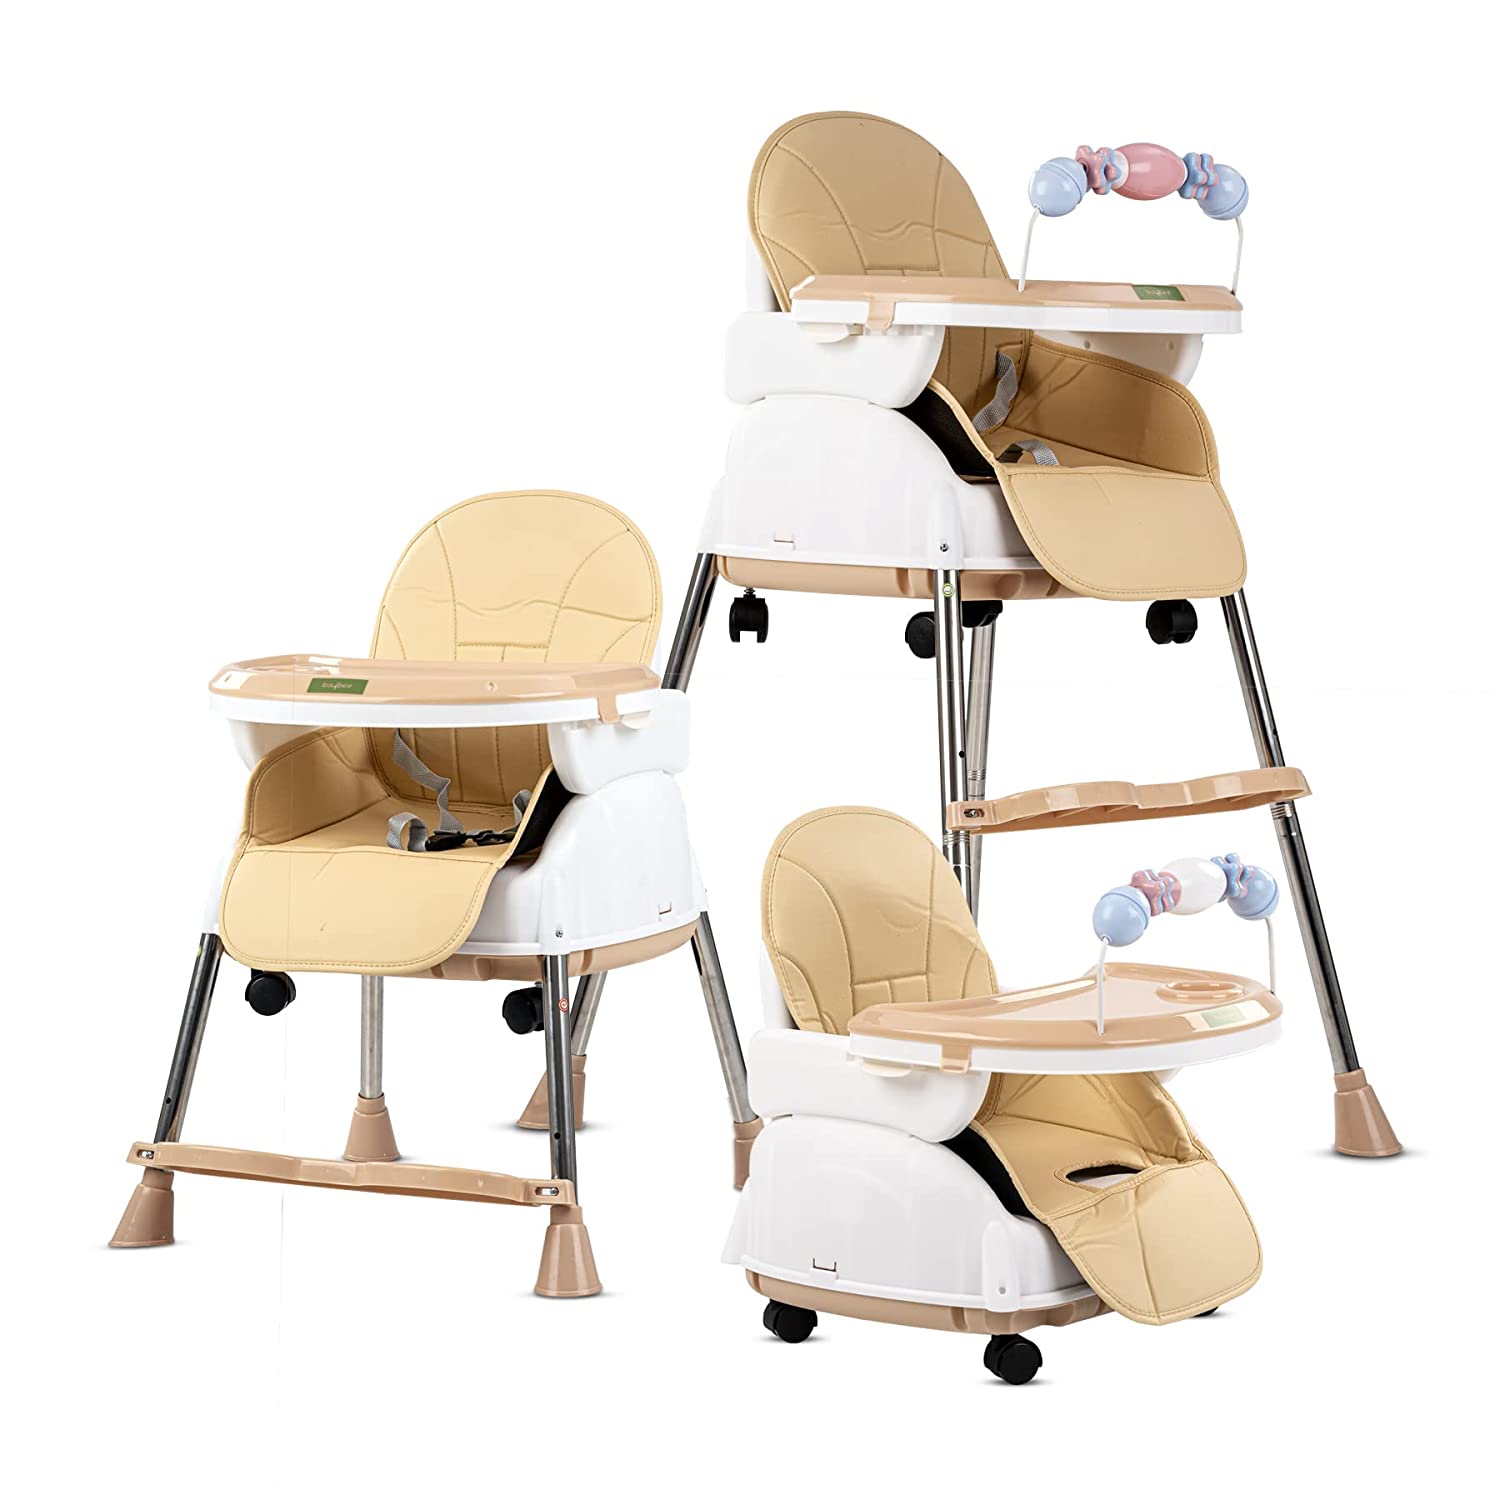 Baybee 5 in 1 Smart and Convertible High Chair